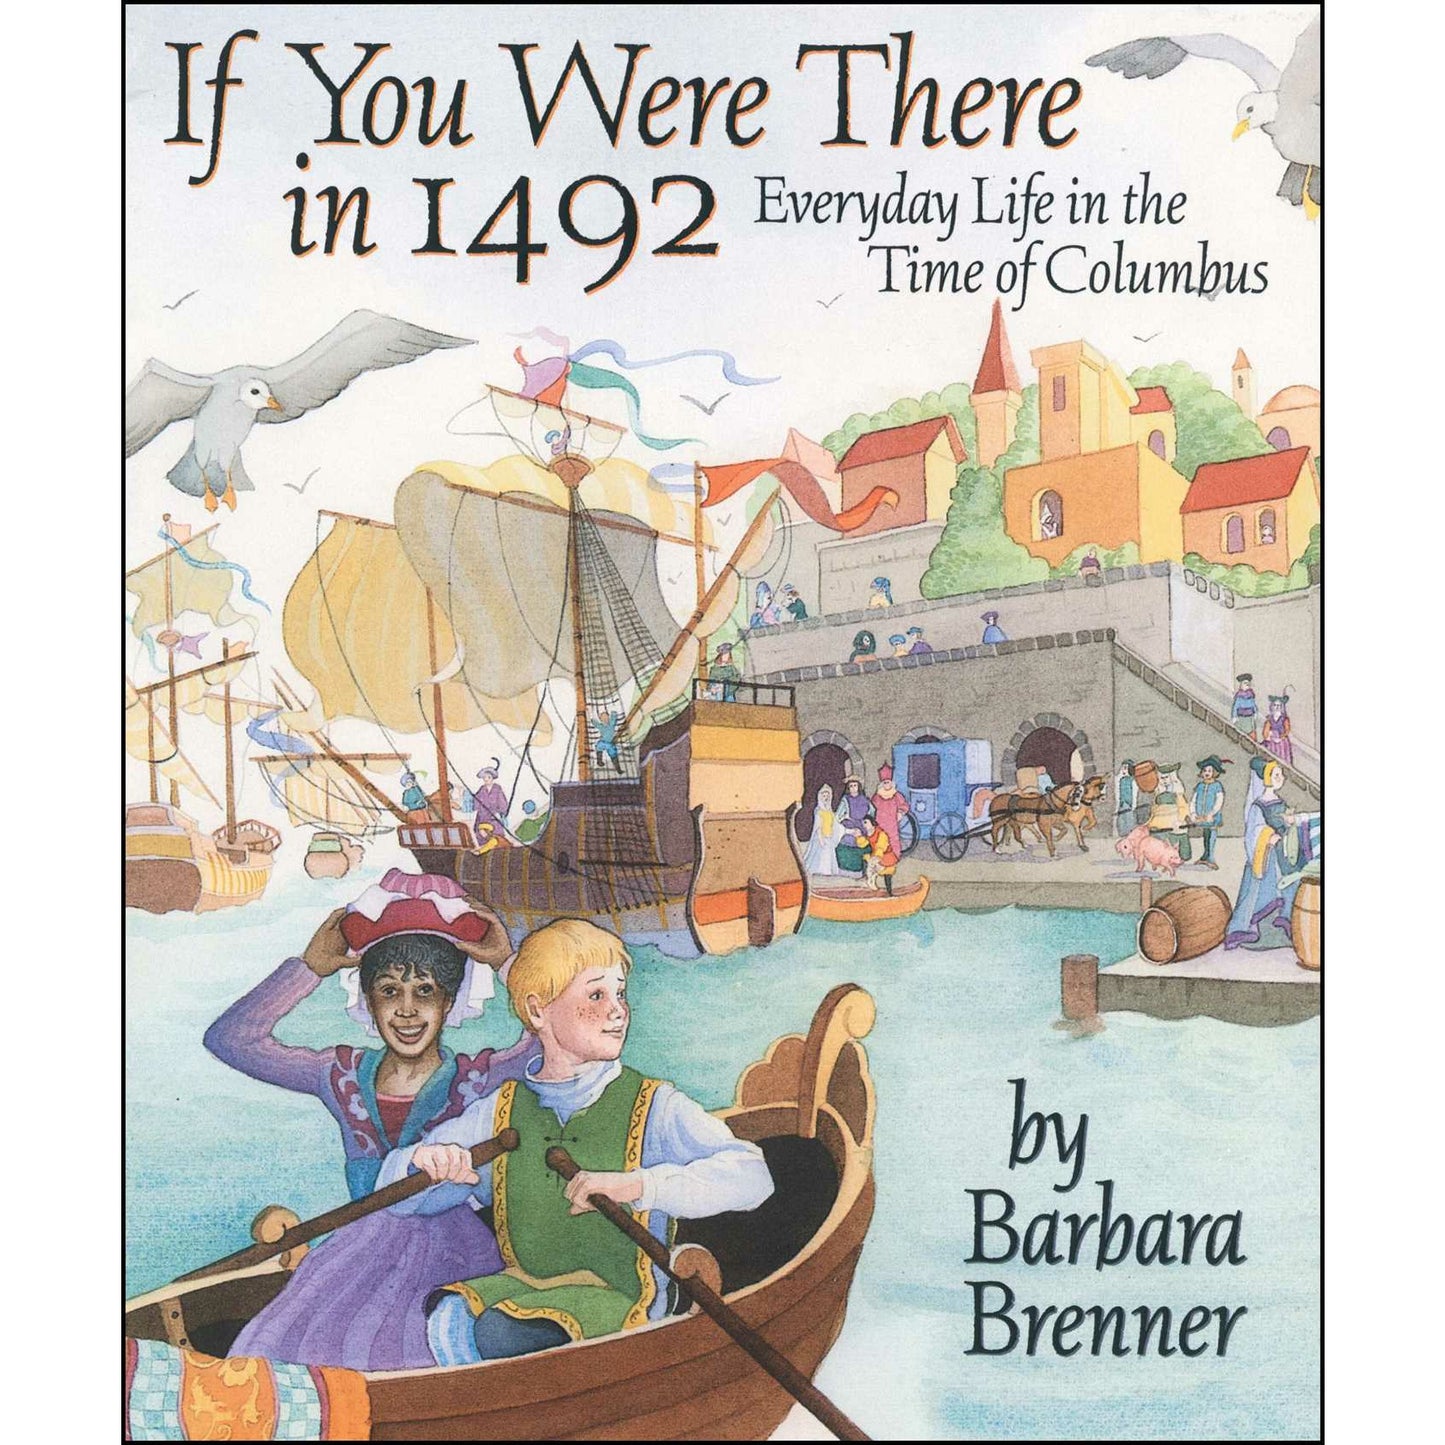 If You Were There in 1492